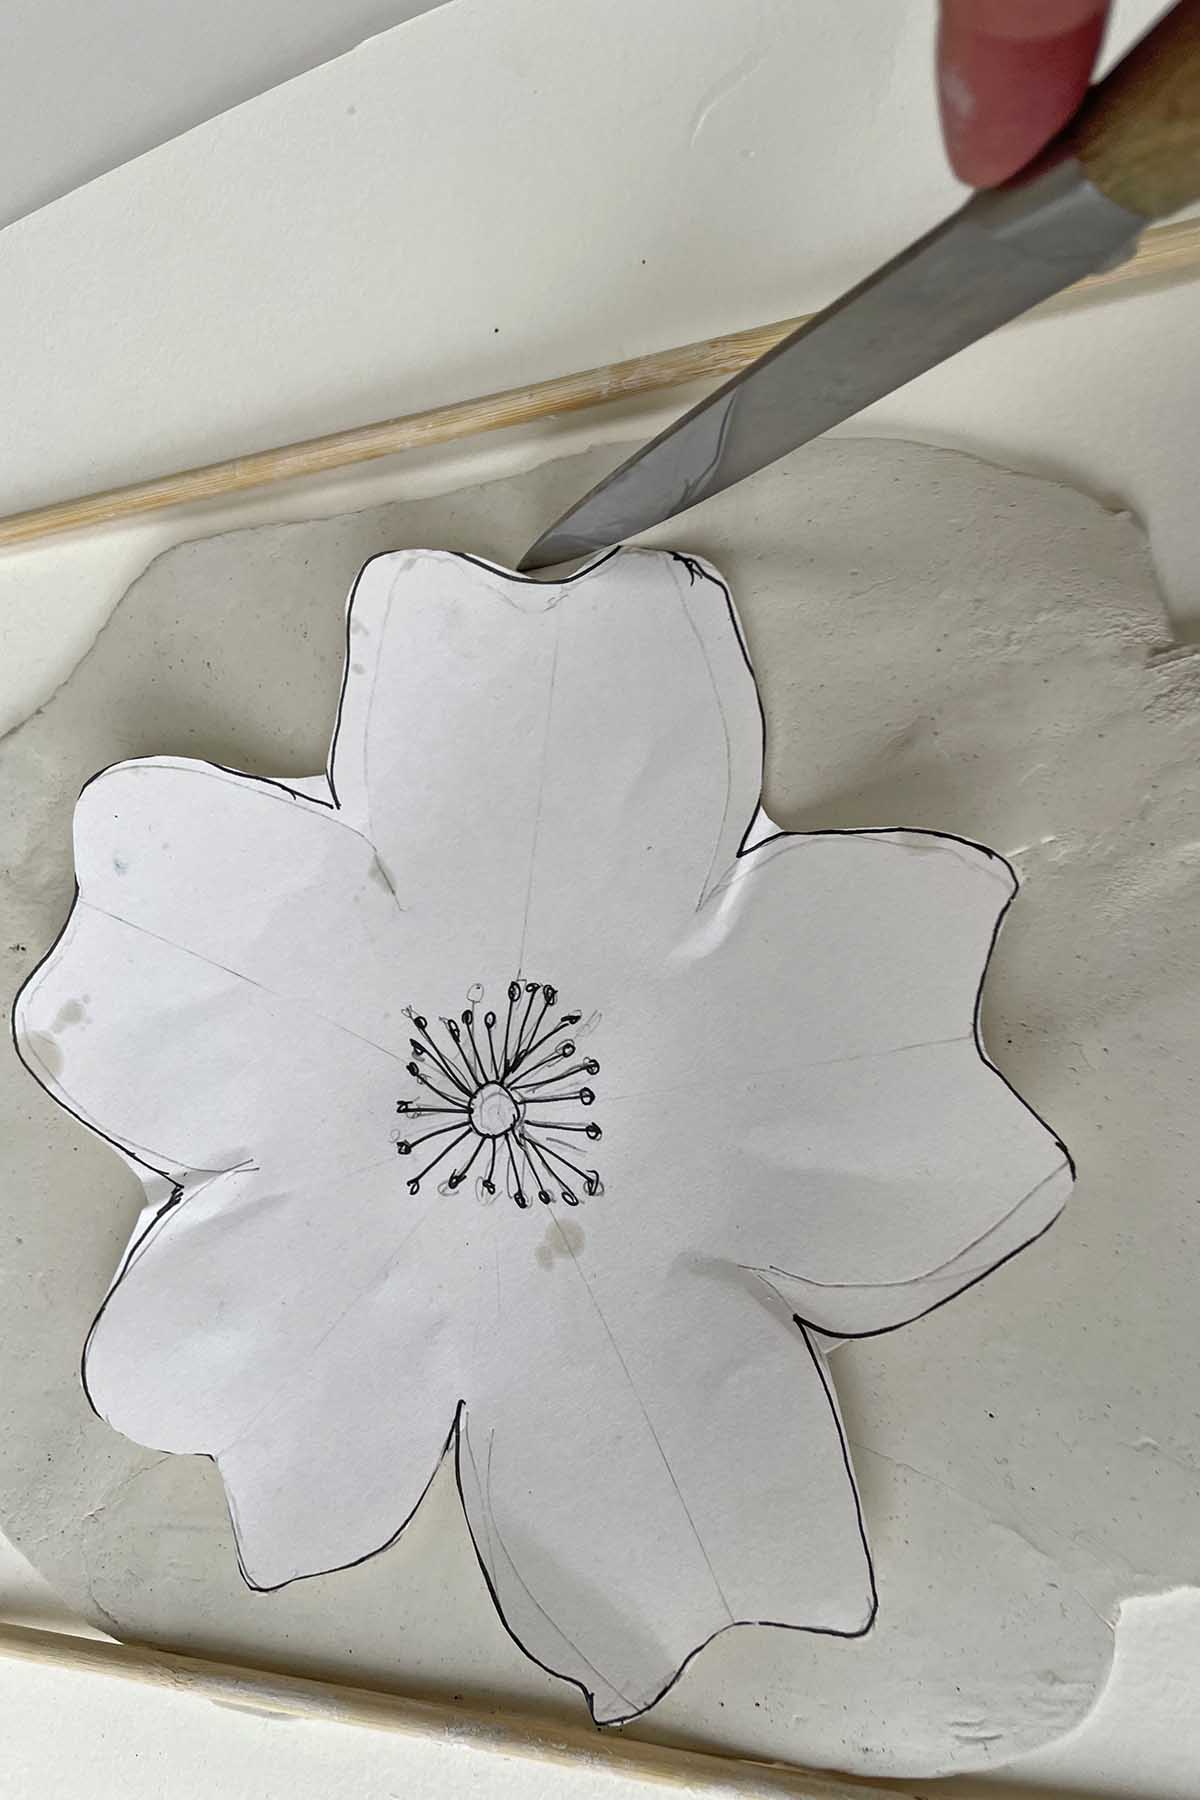 Cutting out the floral shape with the clay